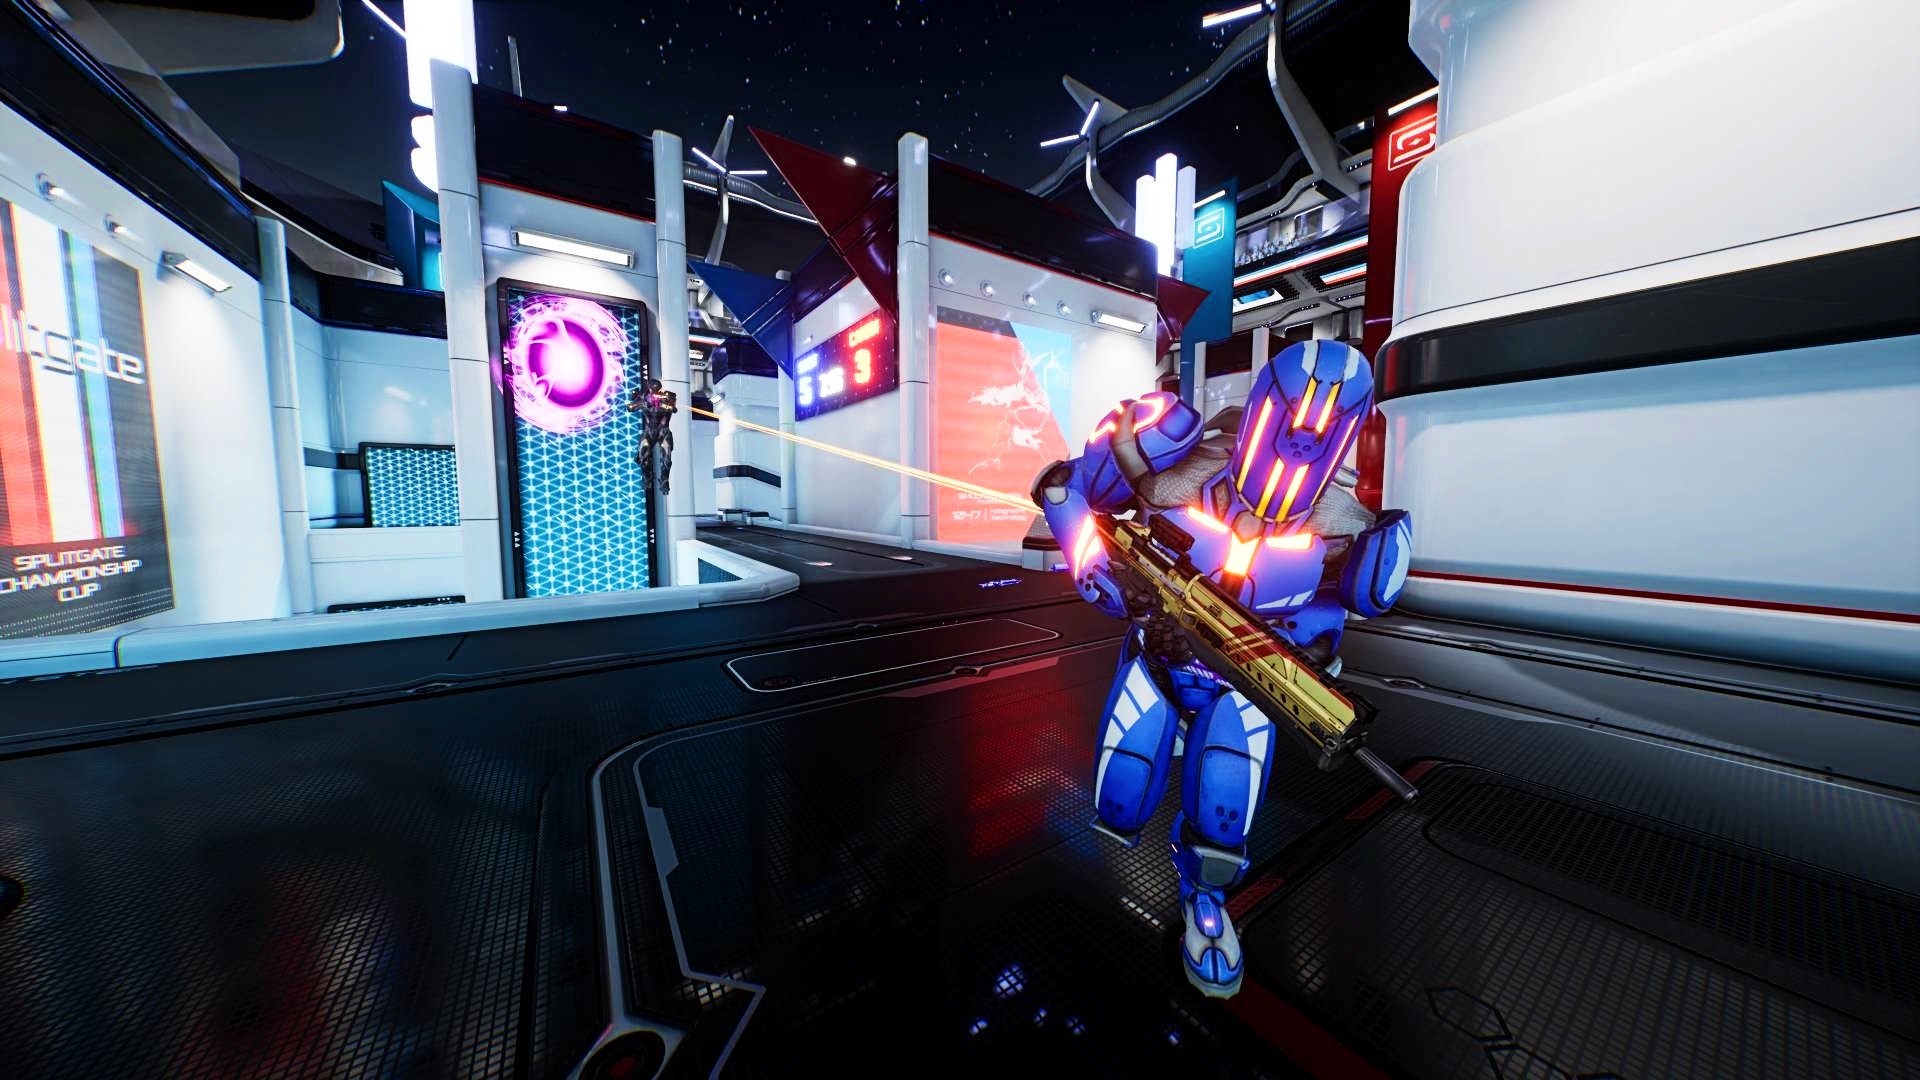 Splitgate servers update: When will Splitgate servers be up today